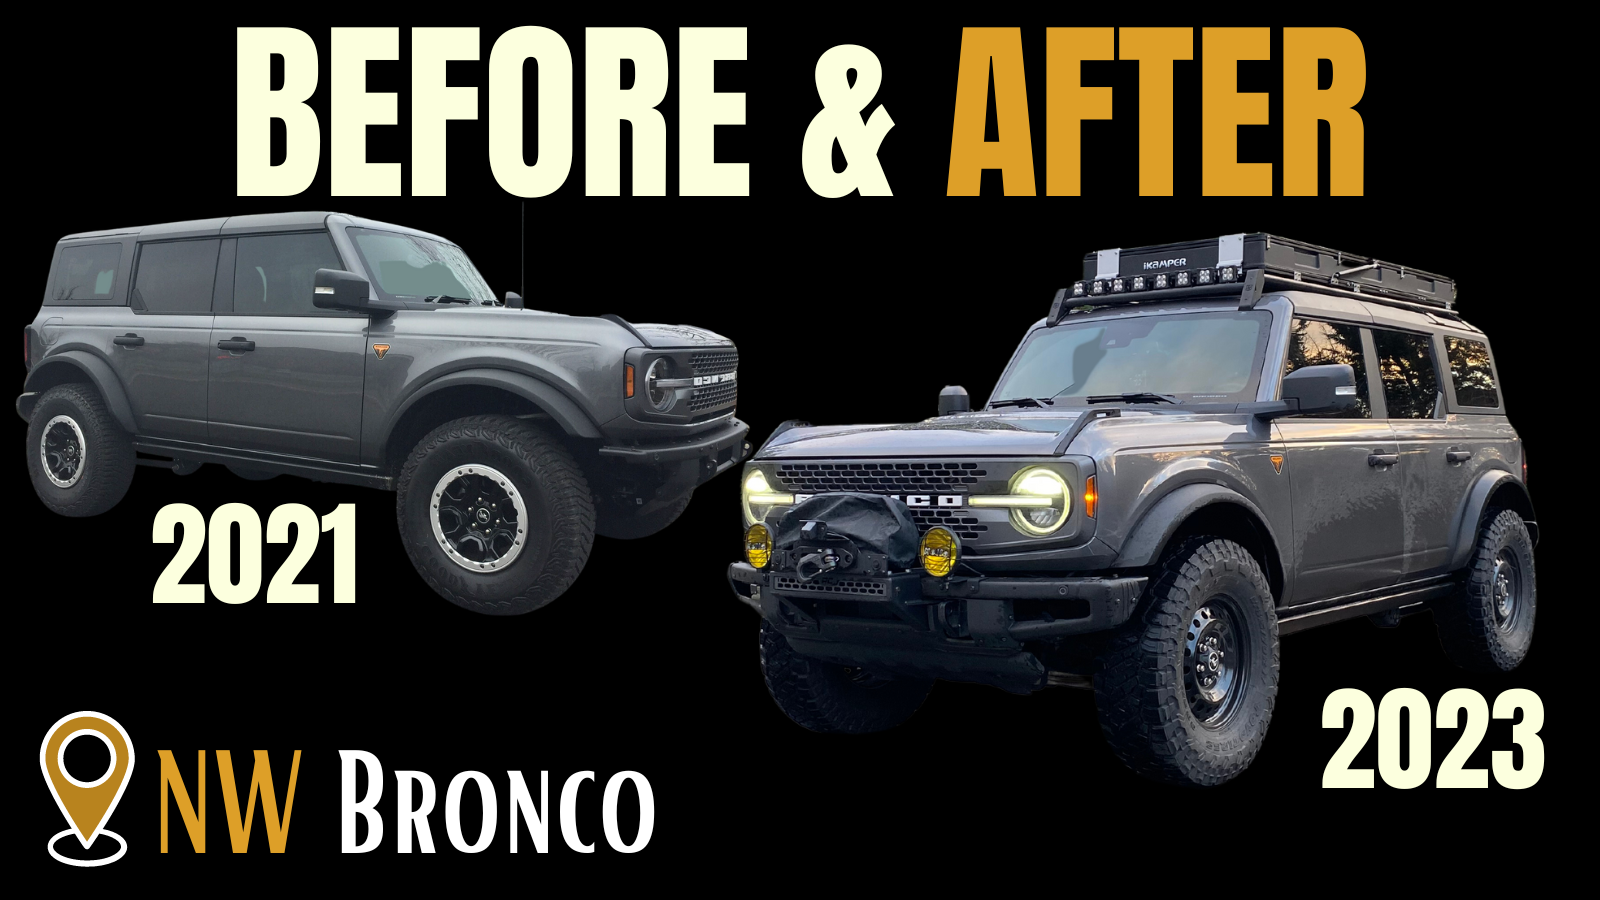 Ford Bronco Before & After Photos. Let's See Your Bronco! BEFORE & AFTER